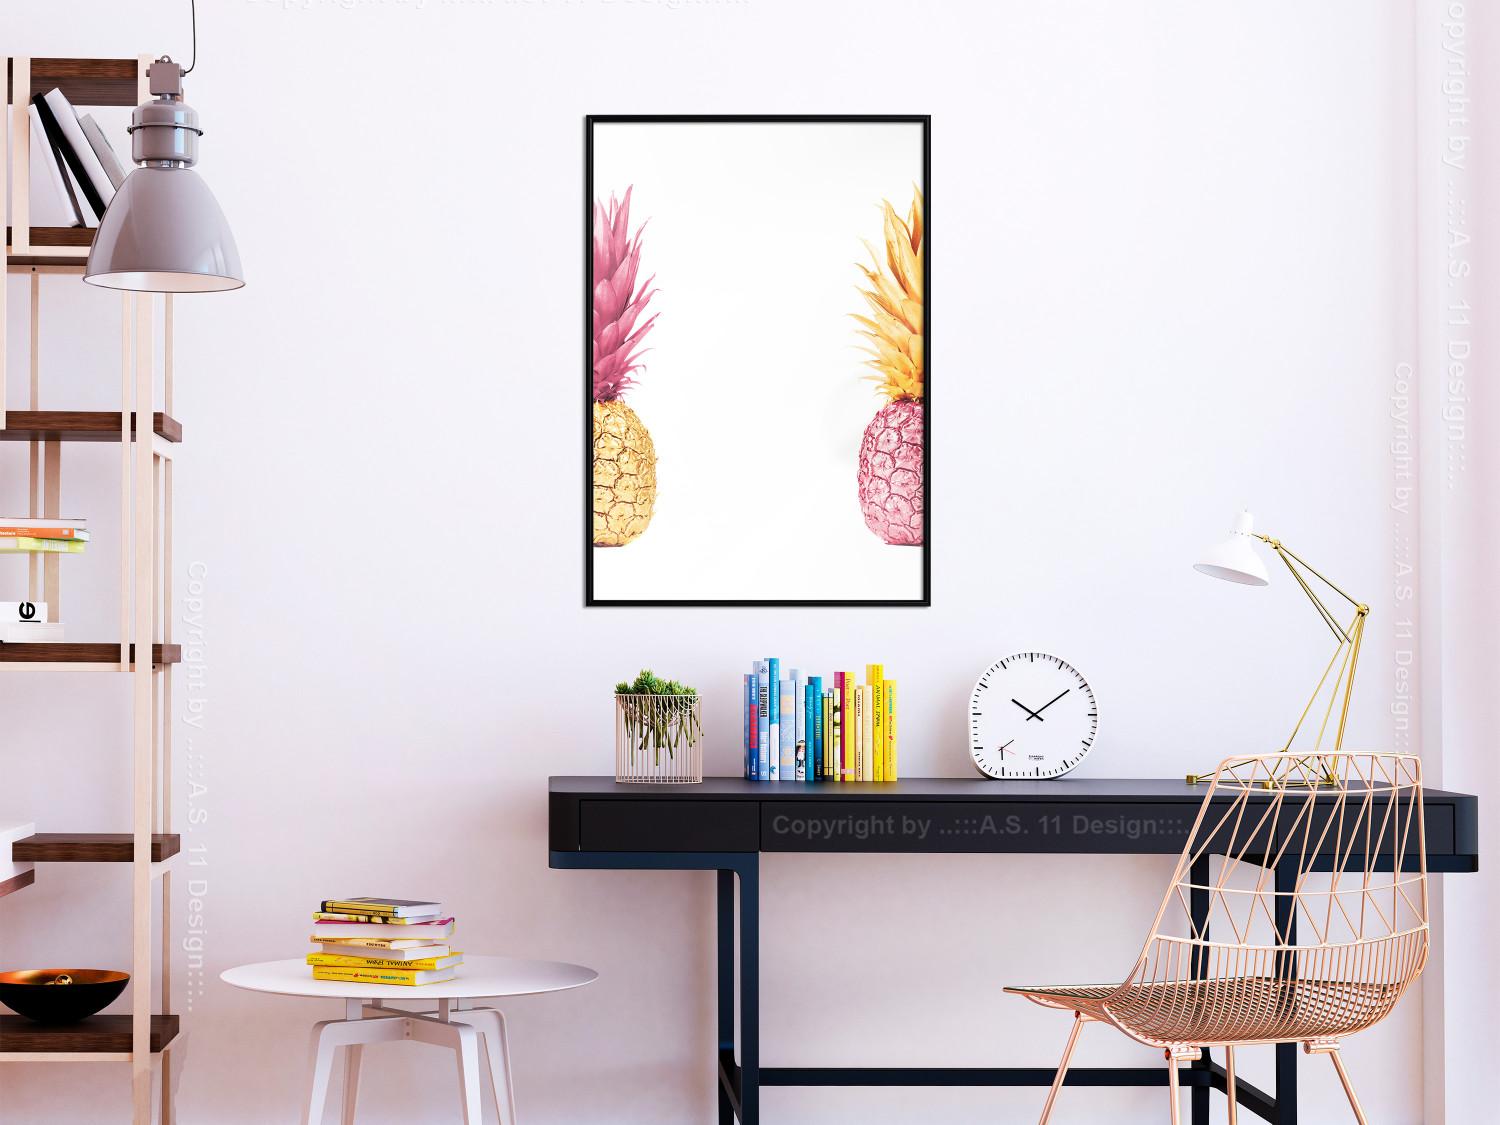 Gallery wall Contrasts - composition with colorful tropical fruits and white background